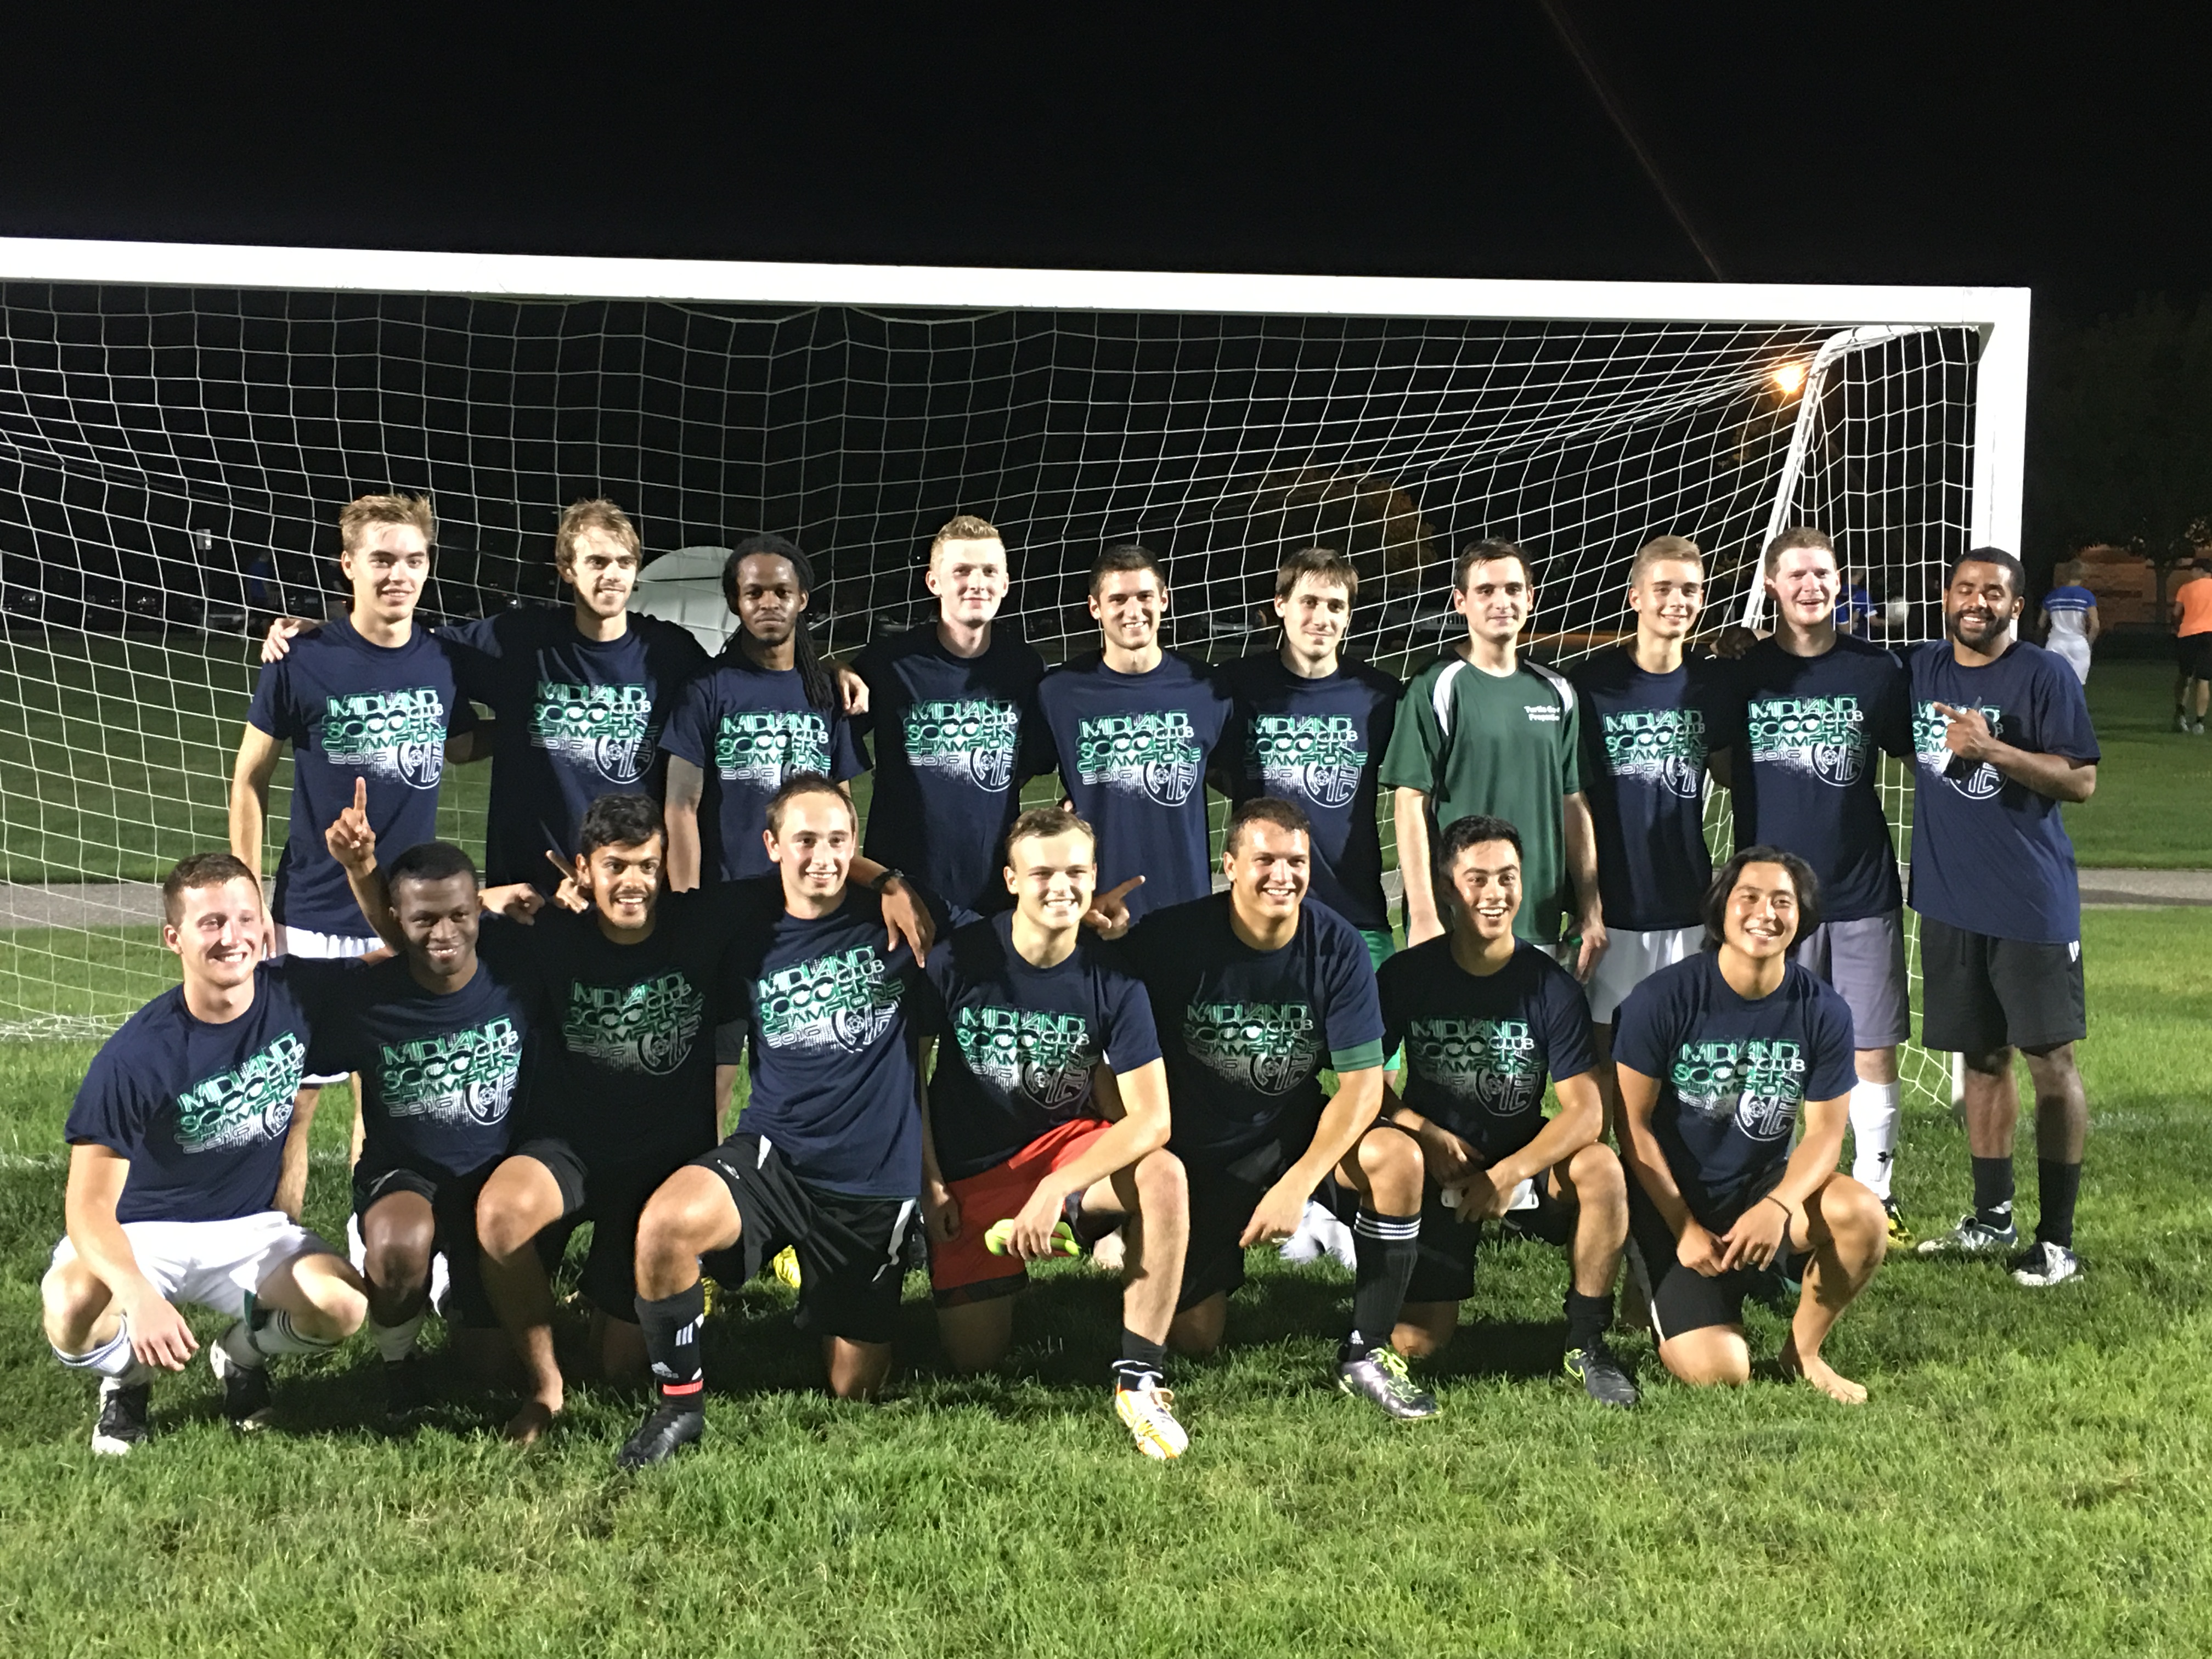 2016 Mens Open Spring League Champions - Turtle Cove Properties FC!!!